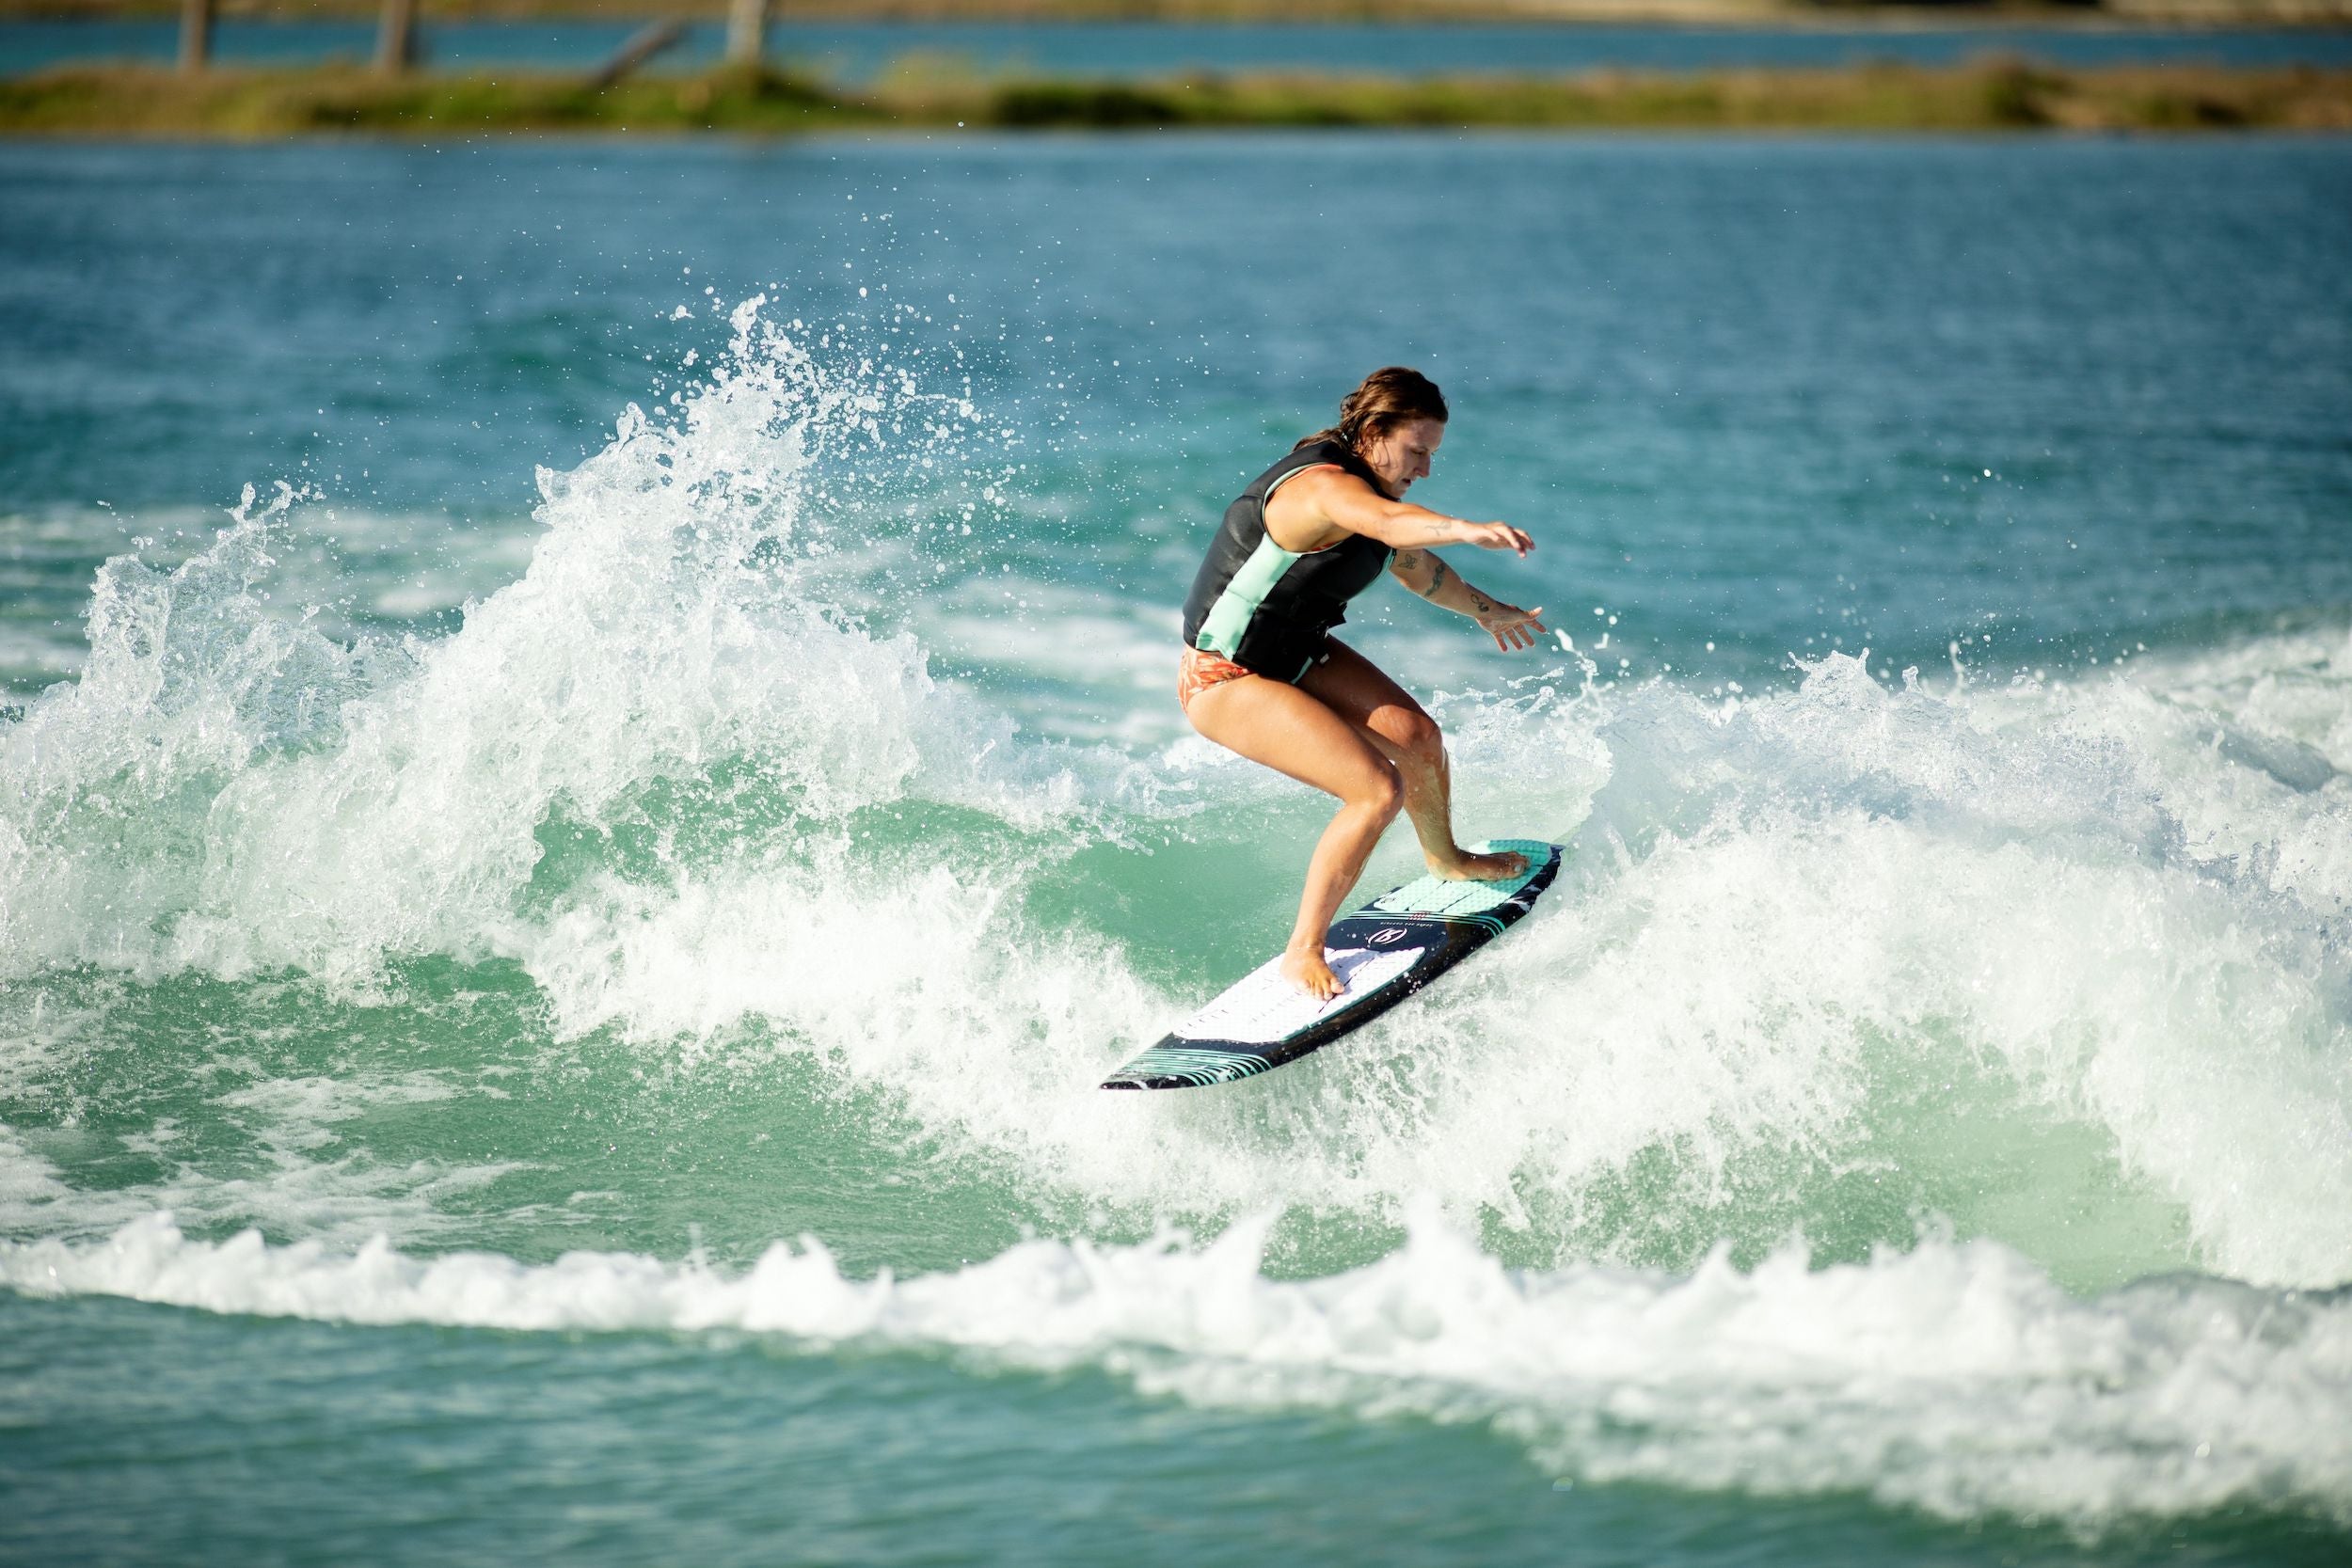 A surfer quickly reacting on a wave with the Ronix 2024 Women's Sea Captain Wakesurf Board by Ronix.